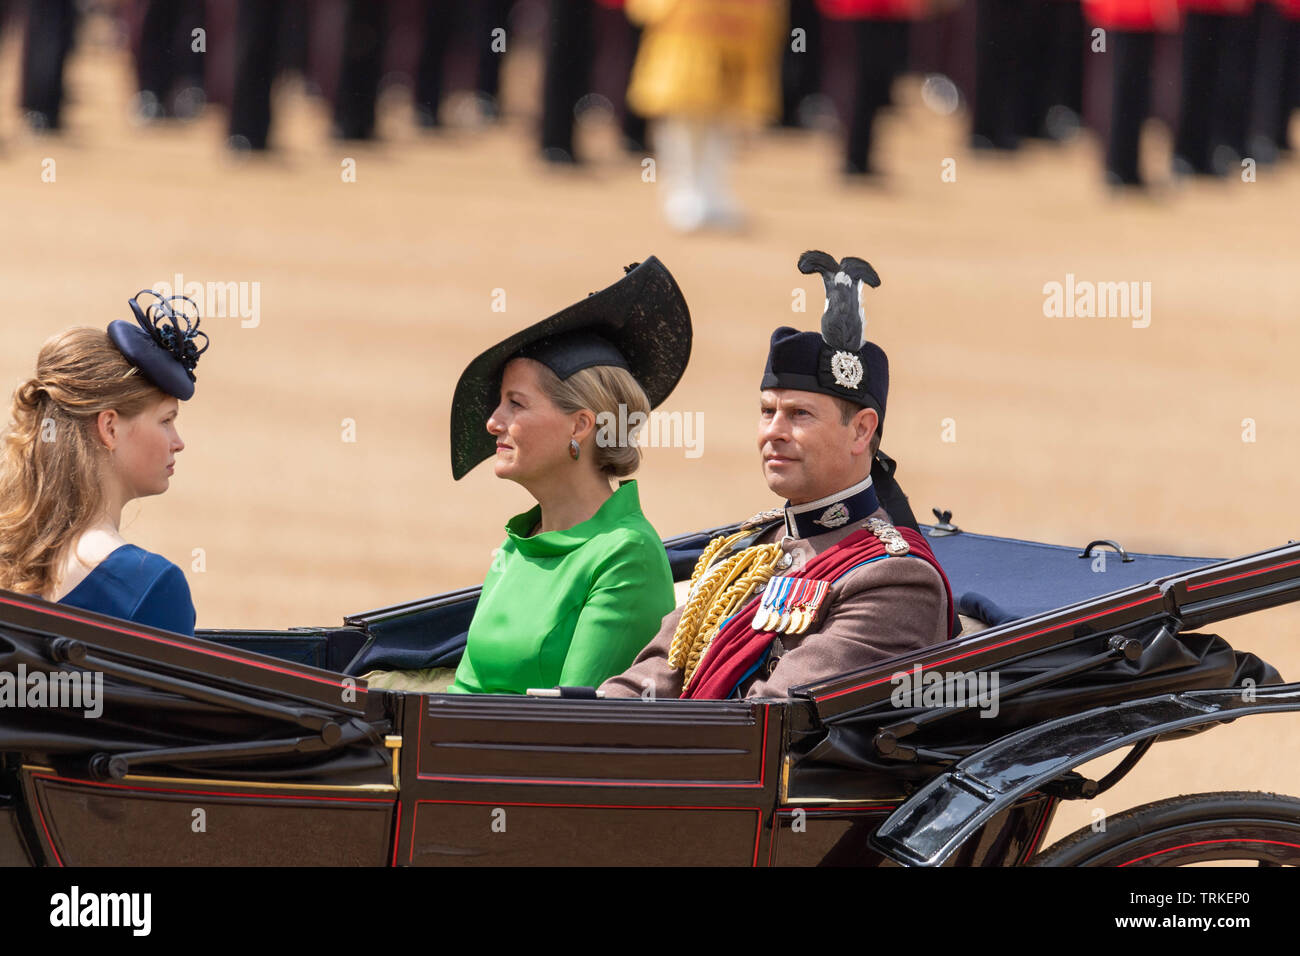 London, UK. 8th June 2019 Trooping the Colour 2019, The Queen's Birthday parade on Horseguards Parade London in the presence of Her Majesty The Queen.  Colour trooped by the 1st Battalion Grenadier Guards Duke and Prince Edward and Countess of Wessex Credit Ian Davidson/Alamy Live News Stock Photo